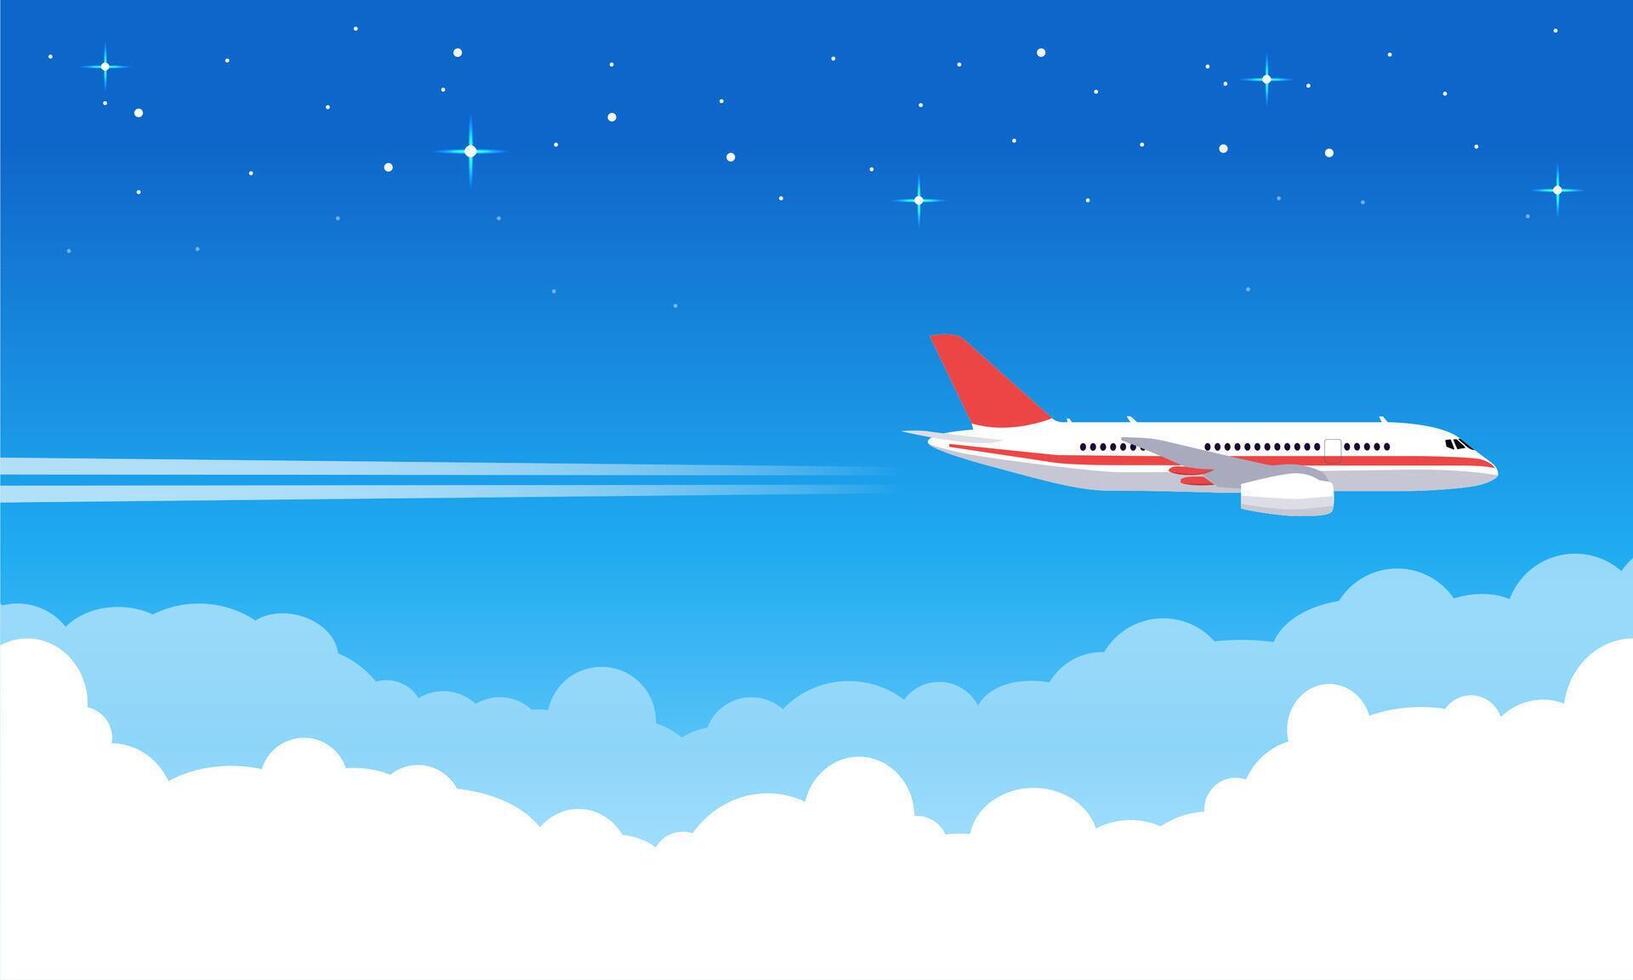 Sky aircraft. Airplane flying in blue sky, flight jet aircraft in clouds, airliner vacation or transportation trip vector illustration